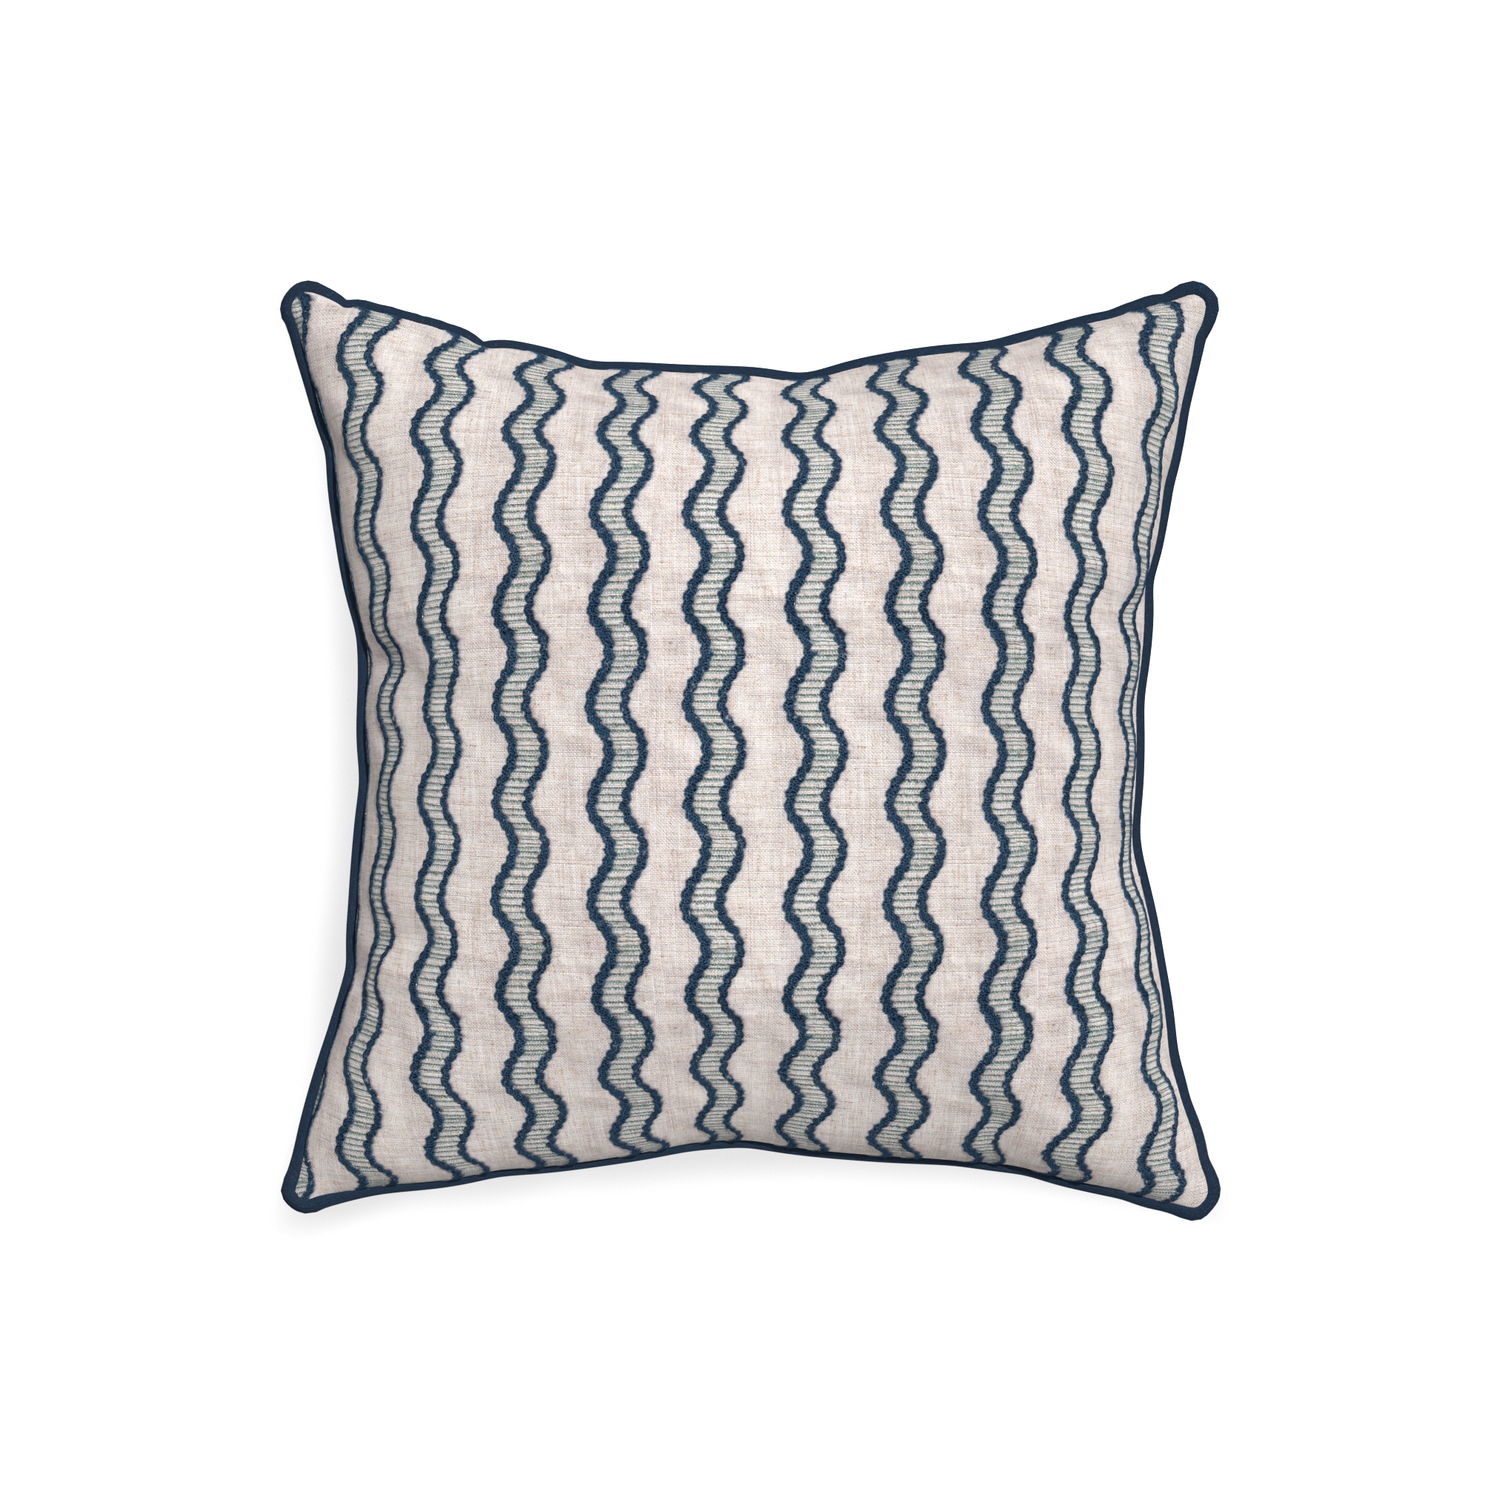 20-square beatrice custom embroidered wavepillow with c piping on white background